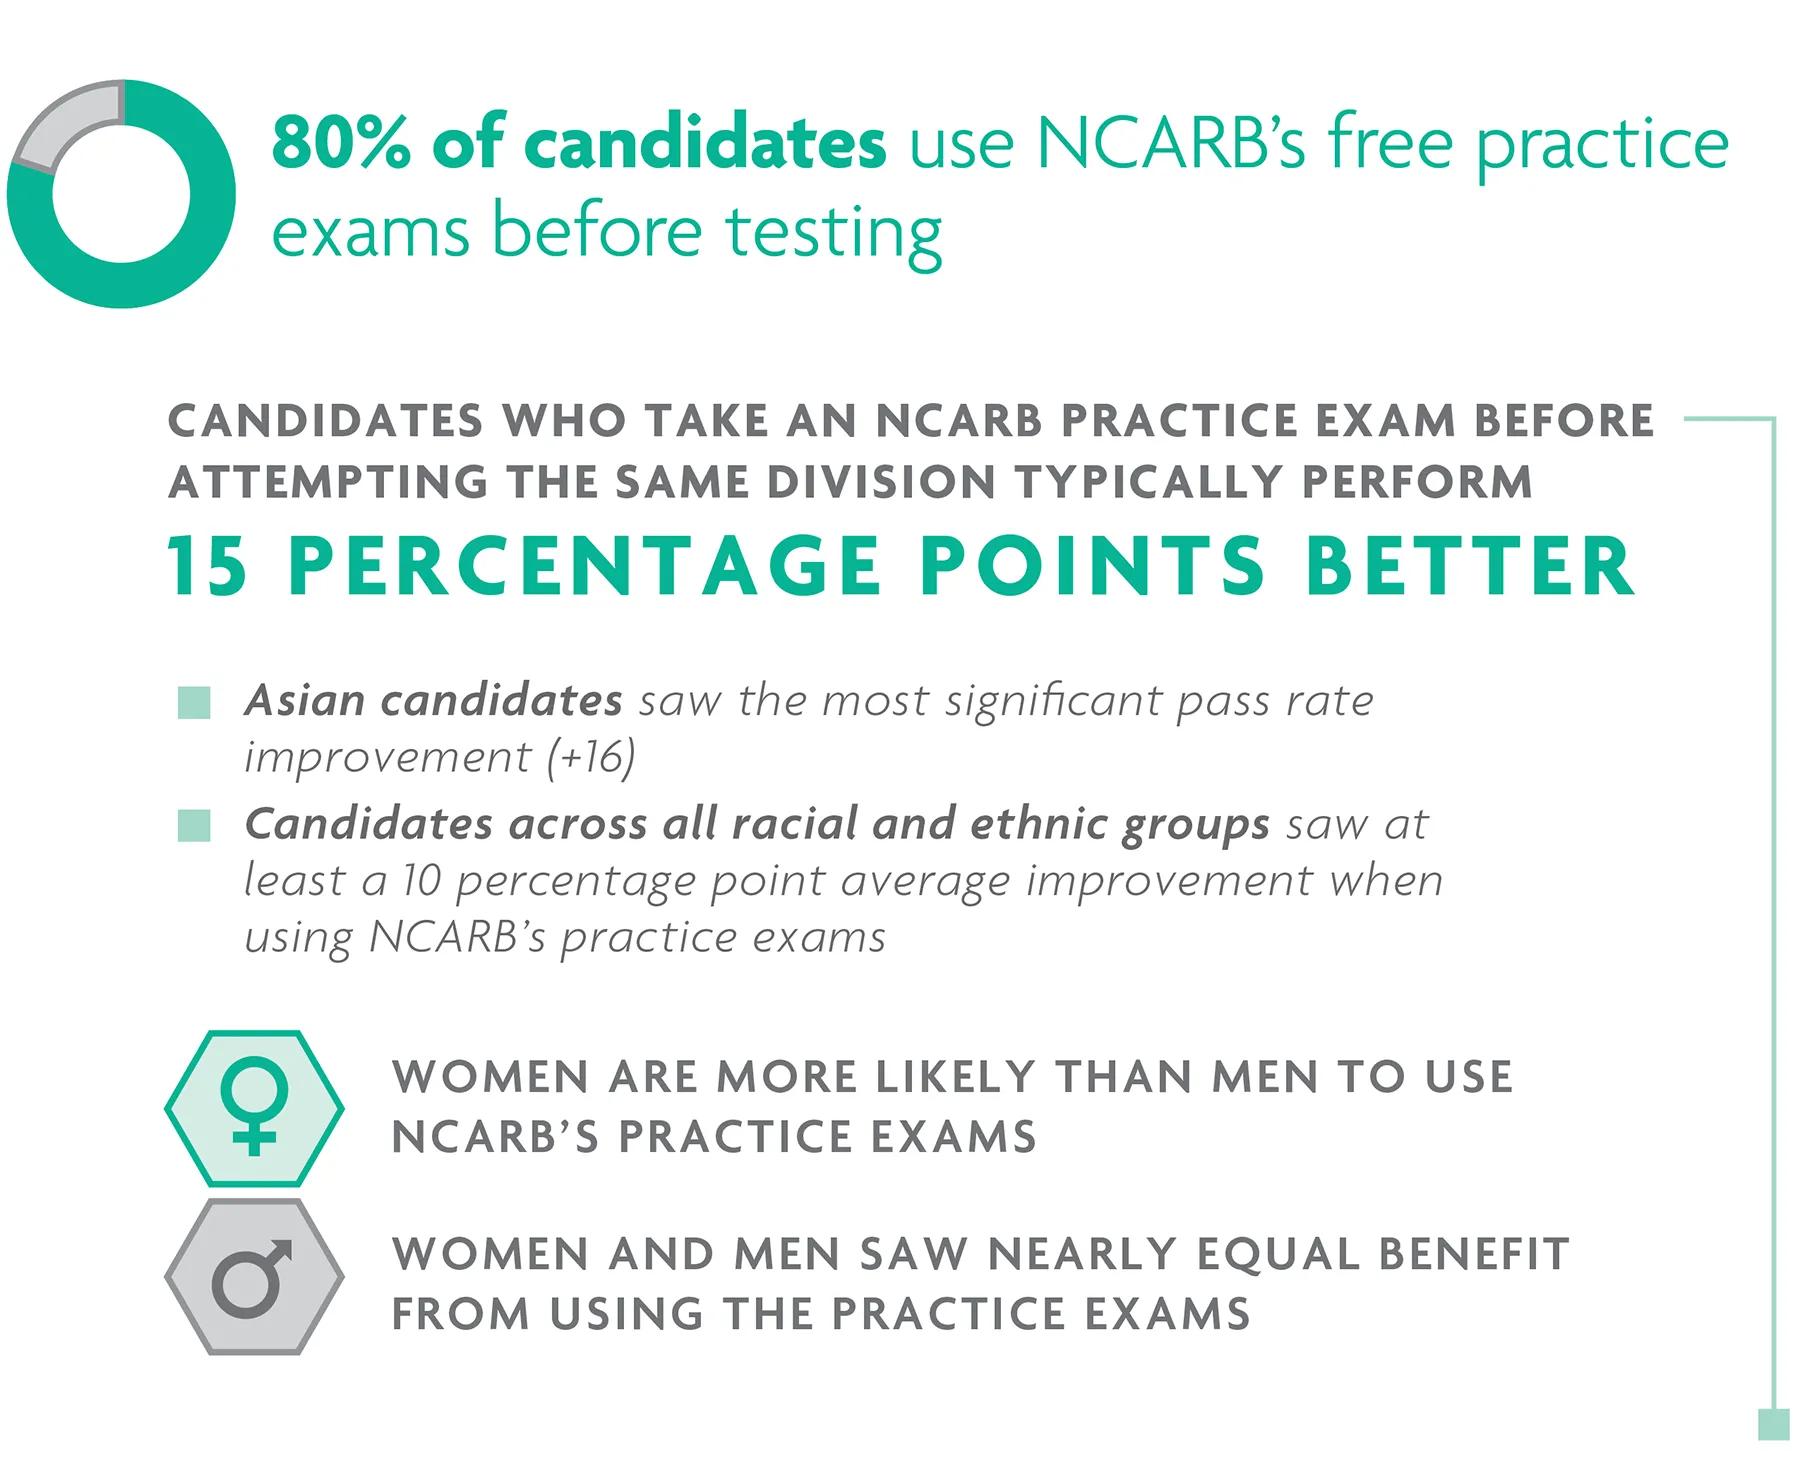 Candidates who use NCARB’s practice exams perform 15 percentage points better on average. For help with data accessibility, contact communications@ncarb.org. 